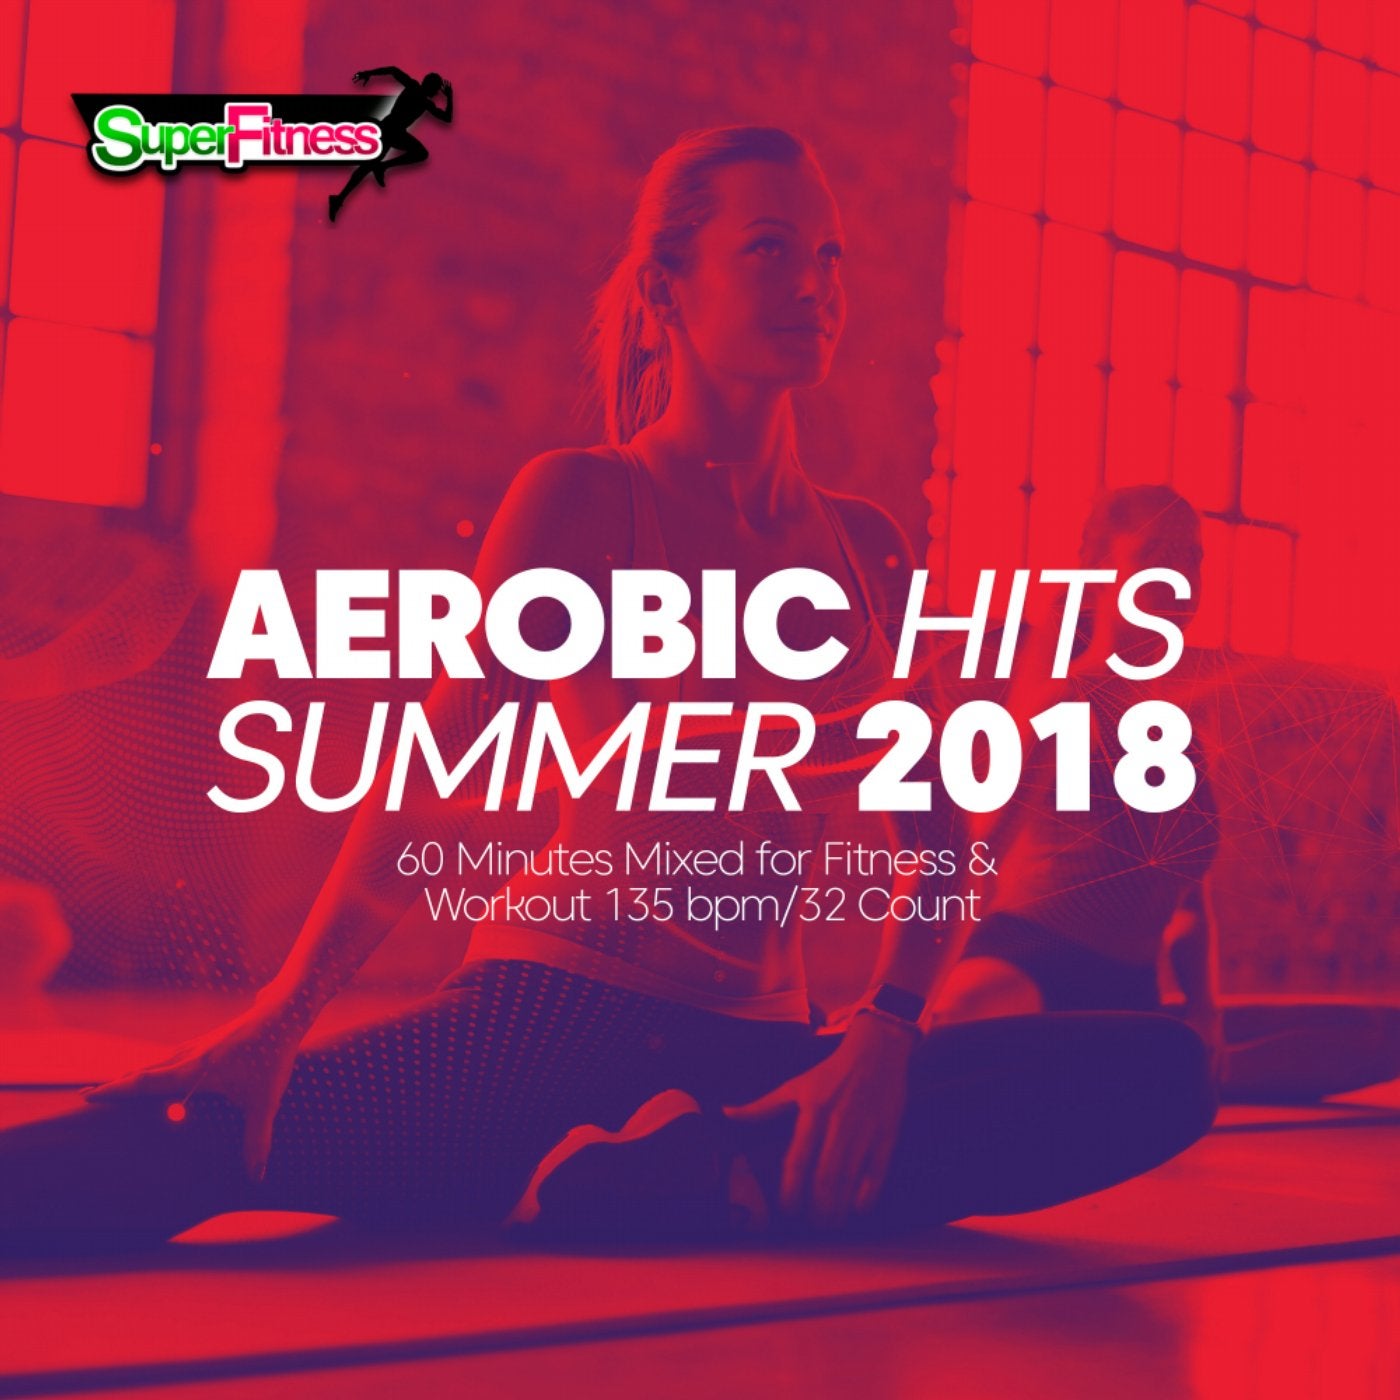 Aerobic Hits Summer 2018: Incl. 60 Minutes Mixed for Fitness & Workout 135 bpm/32 Count